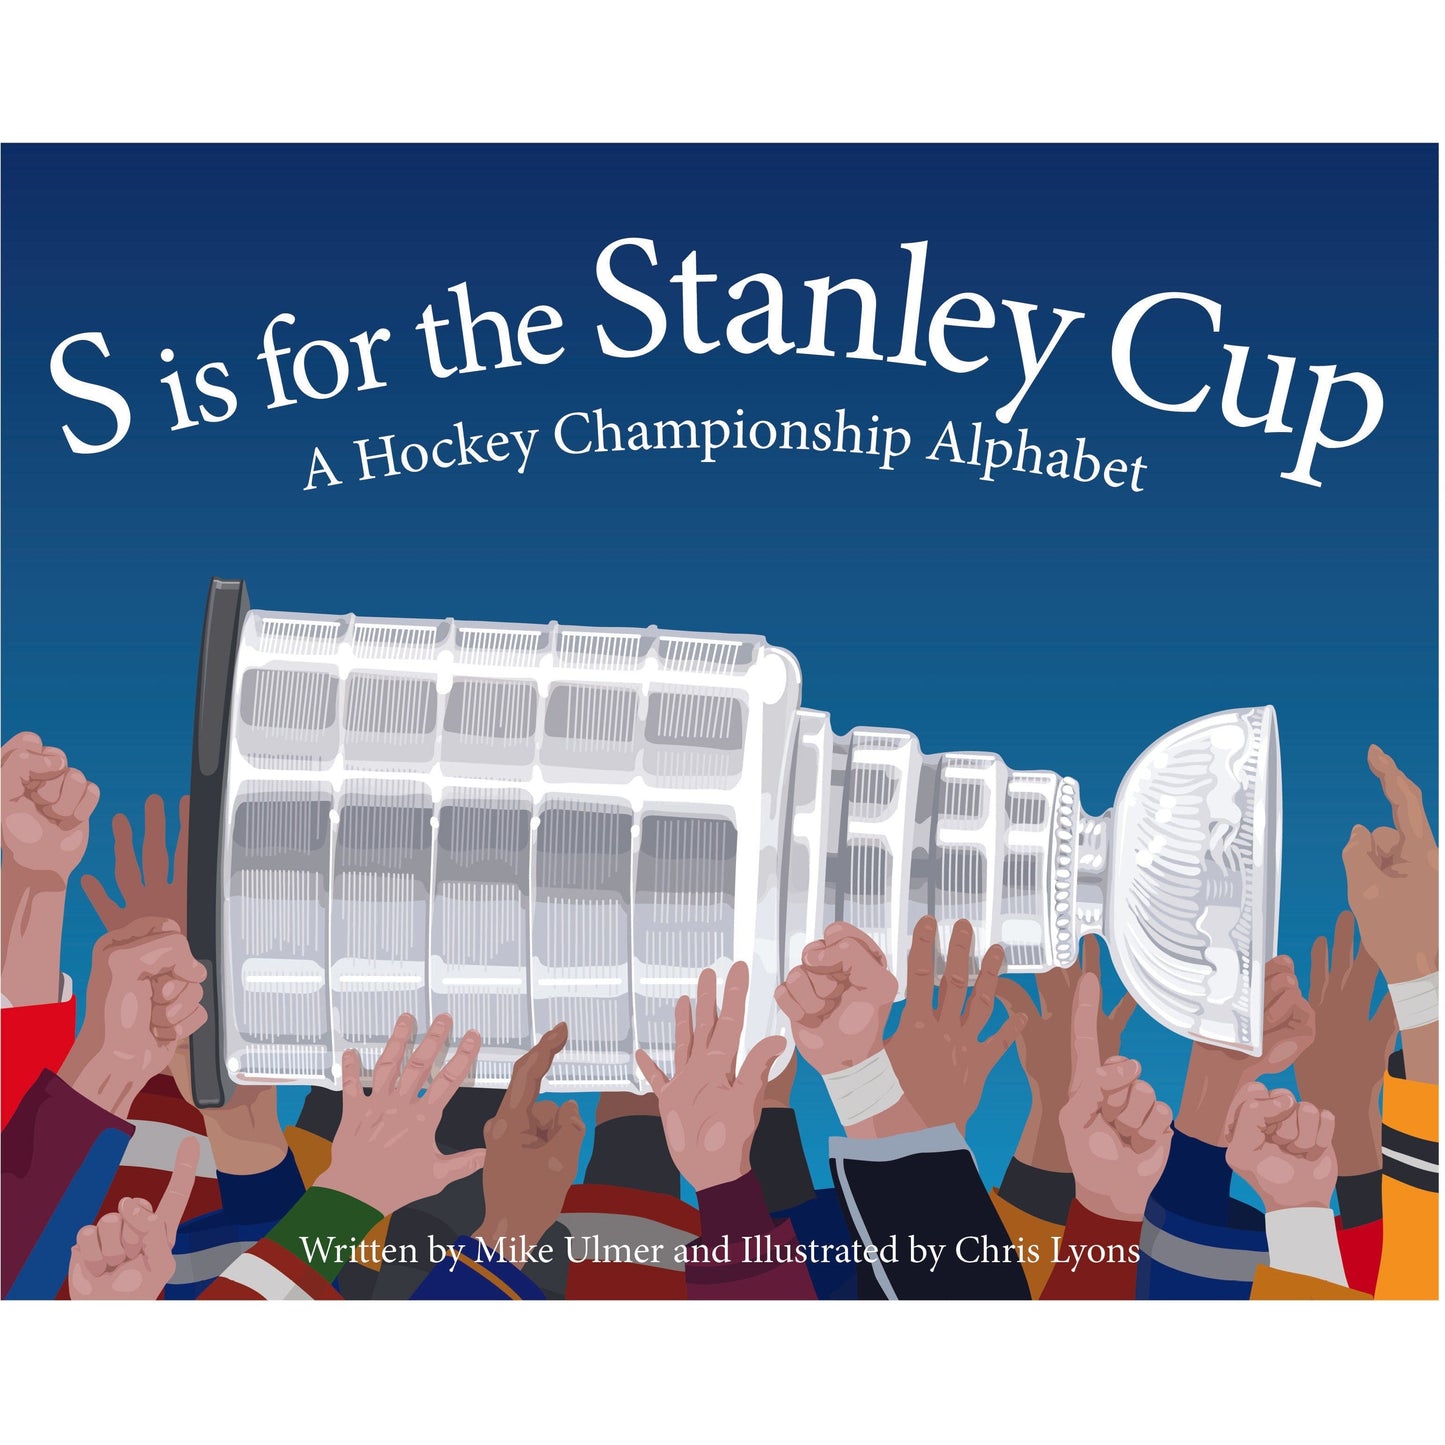 S is for the Stanley Cup: A Hockey Championship Alphabet